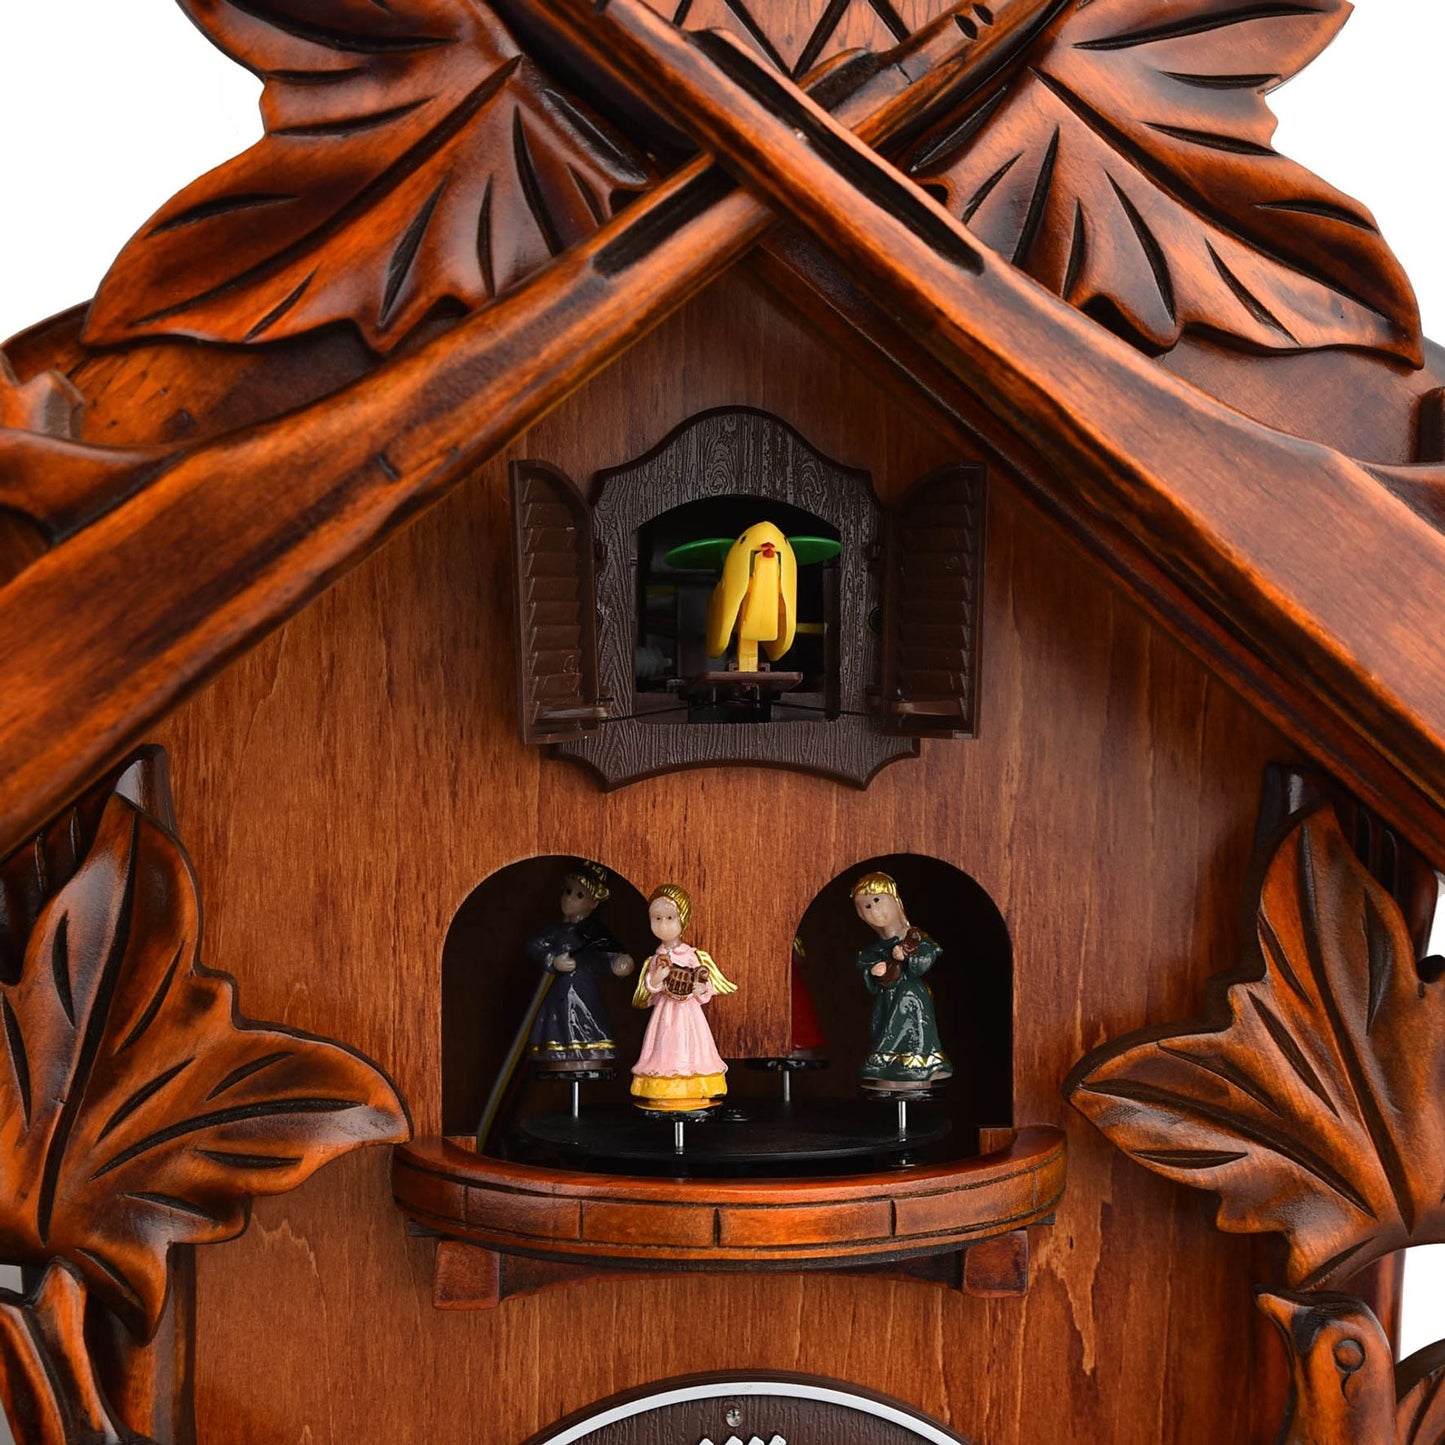 Wooden Cuckoo Clock – Roundabout with Stags head - Quartz